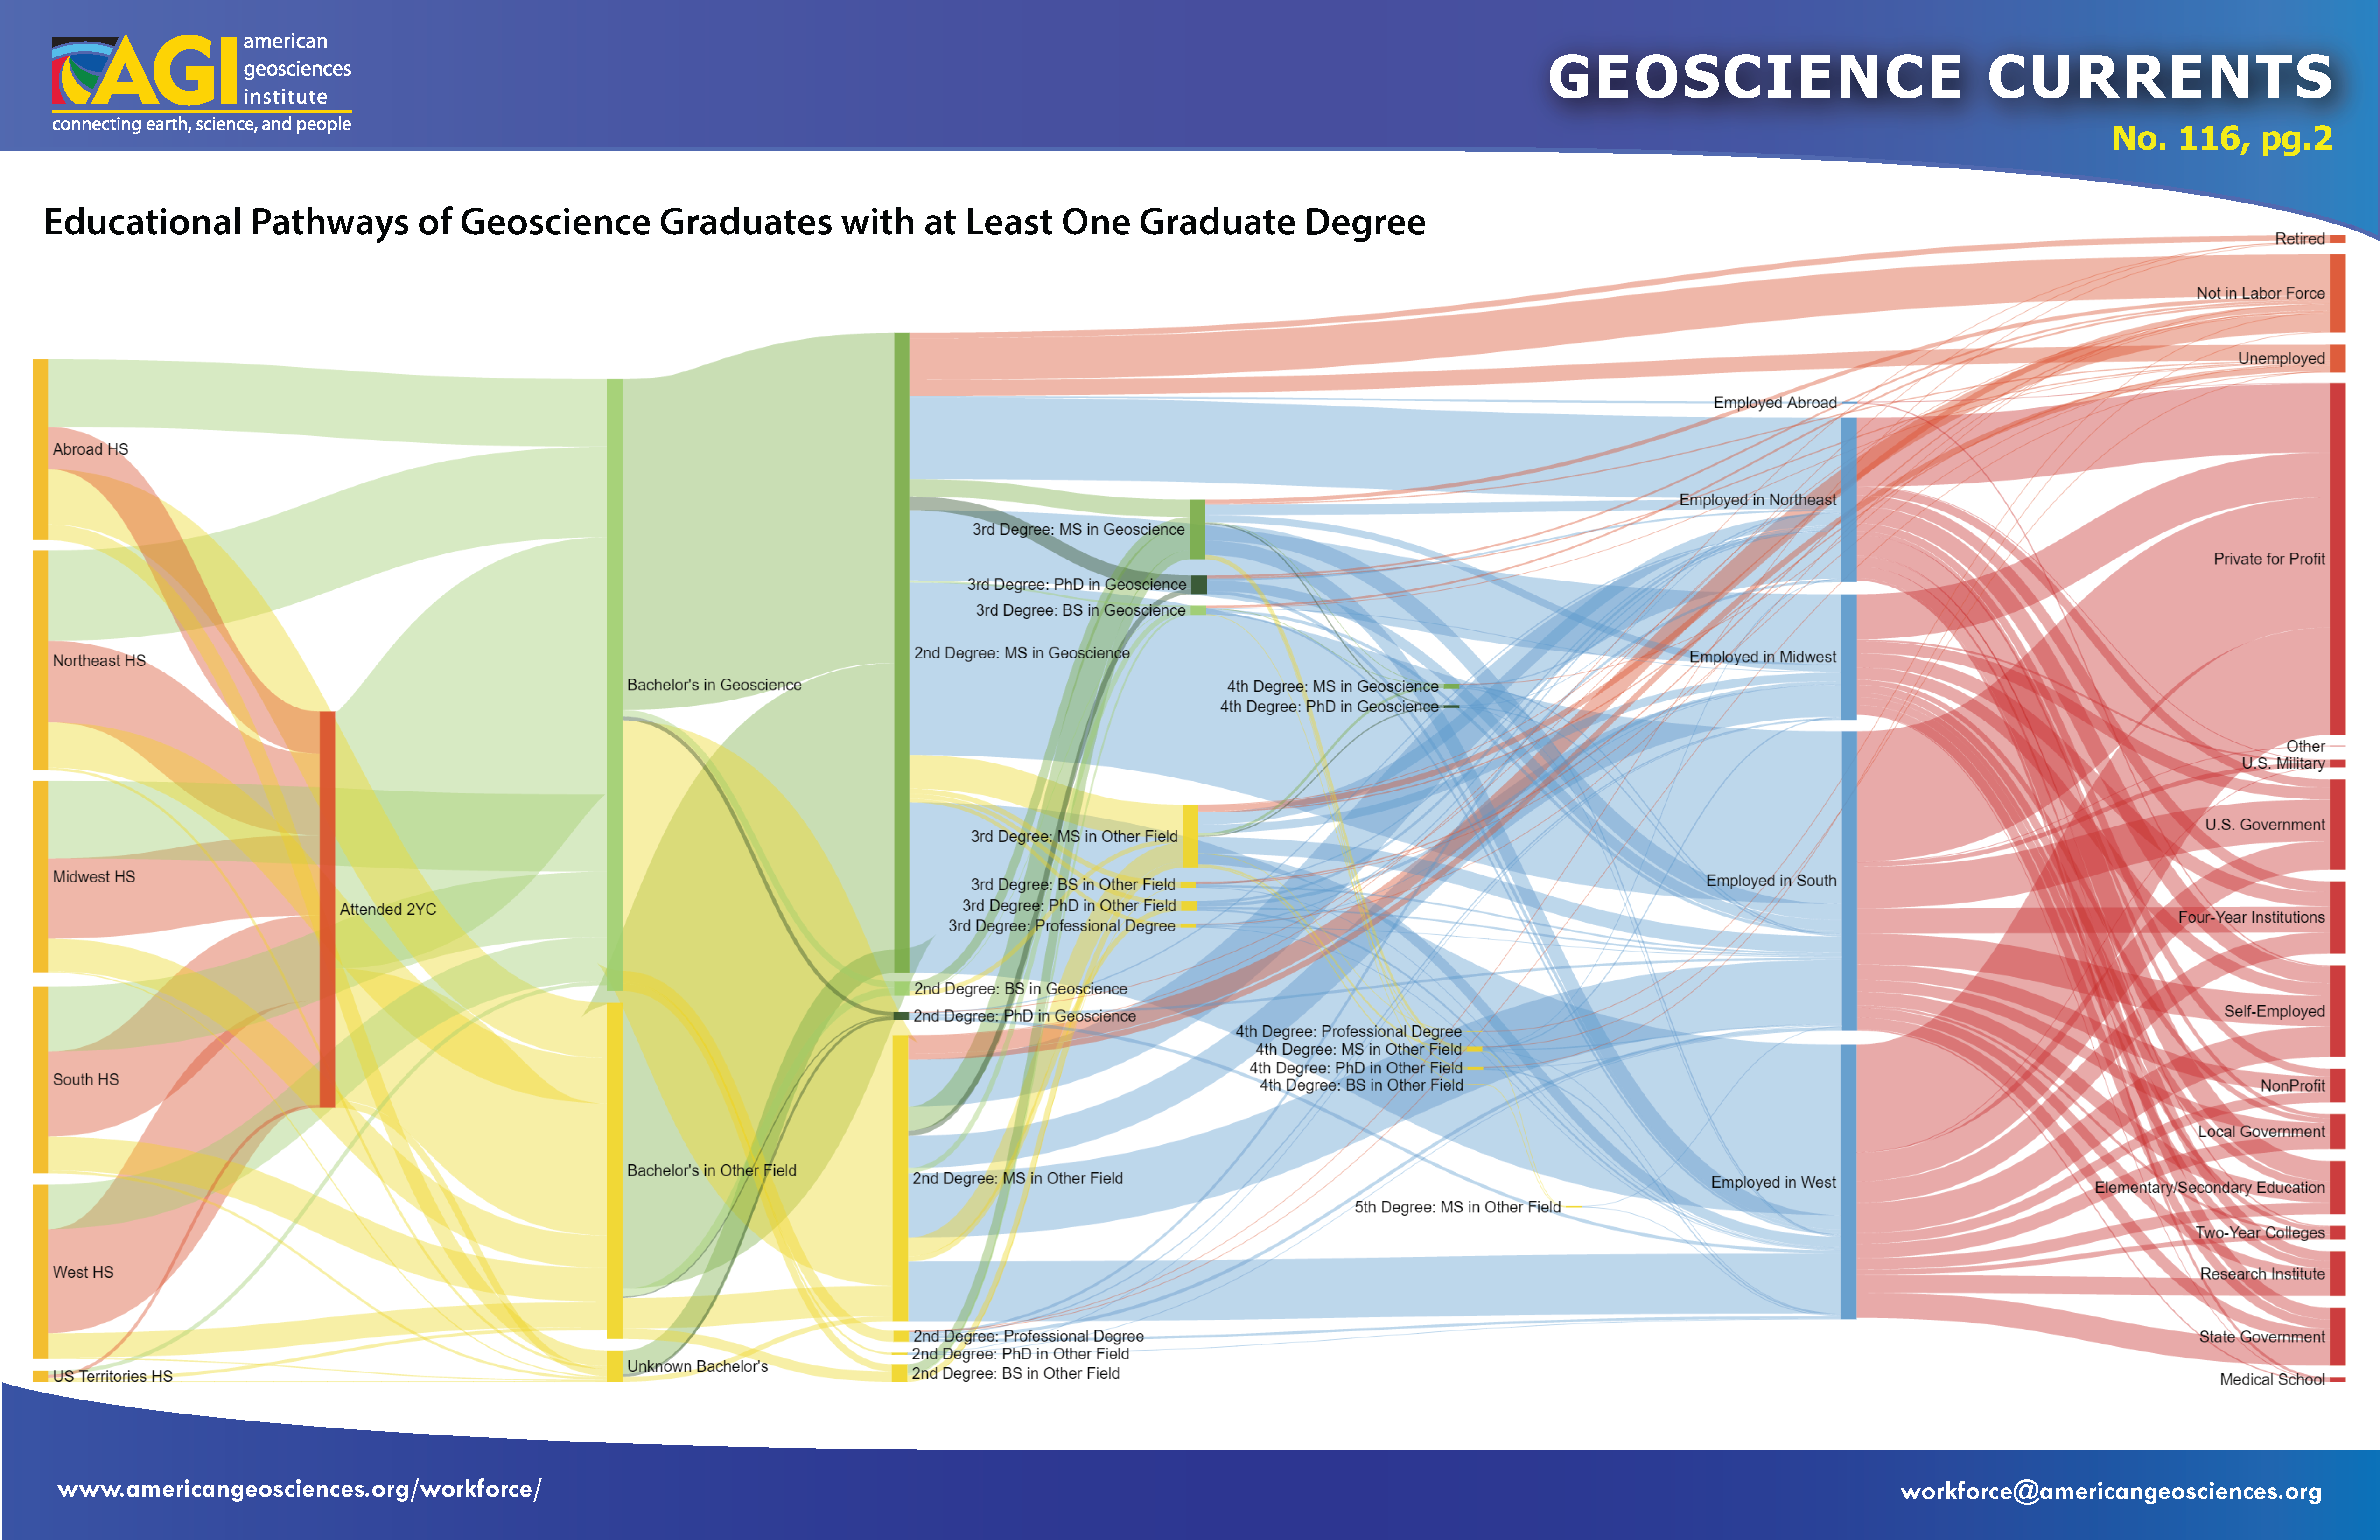 Geoscience Currents 116